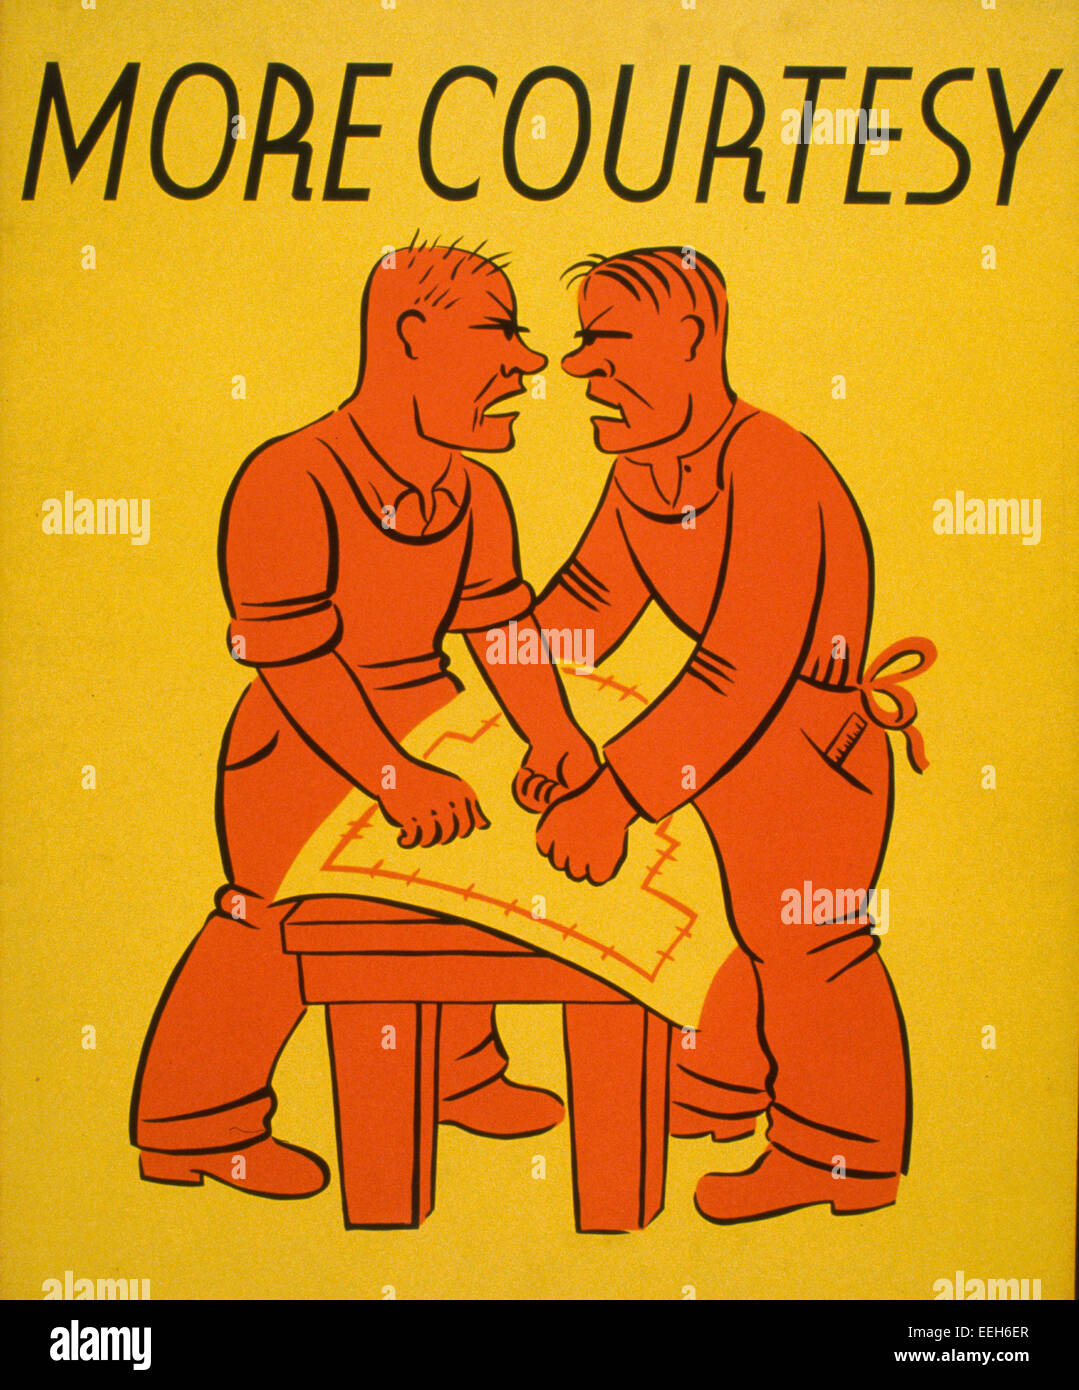 More courtesy - Poster promoting better interpersonal communications in the workplace, showing two men arguing, circa 1938 Stock Photo